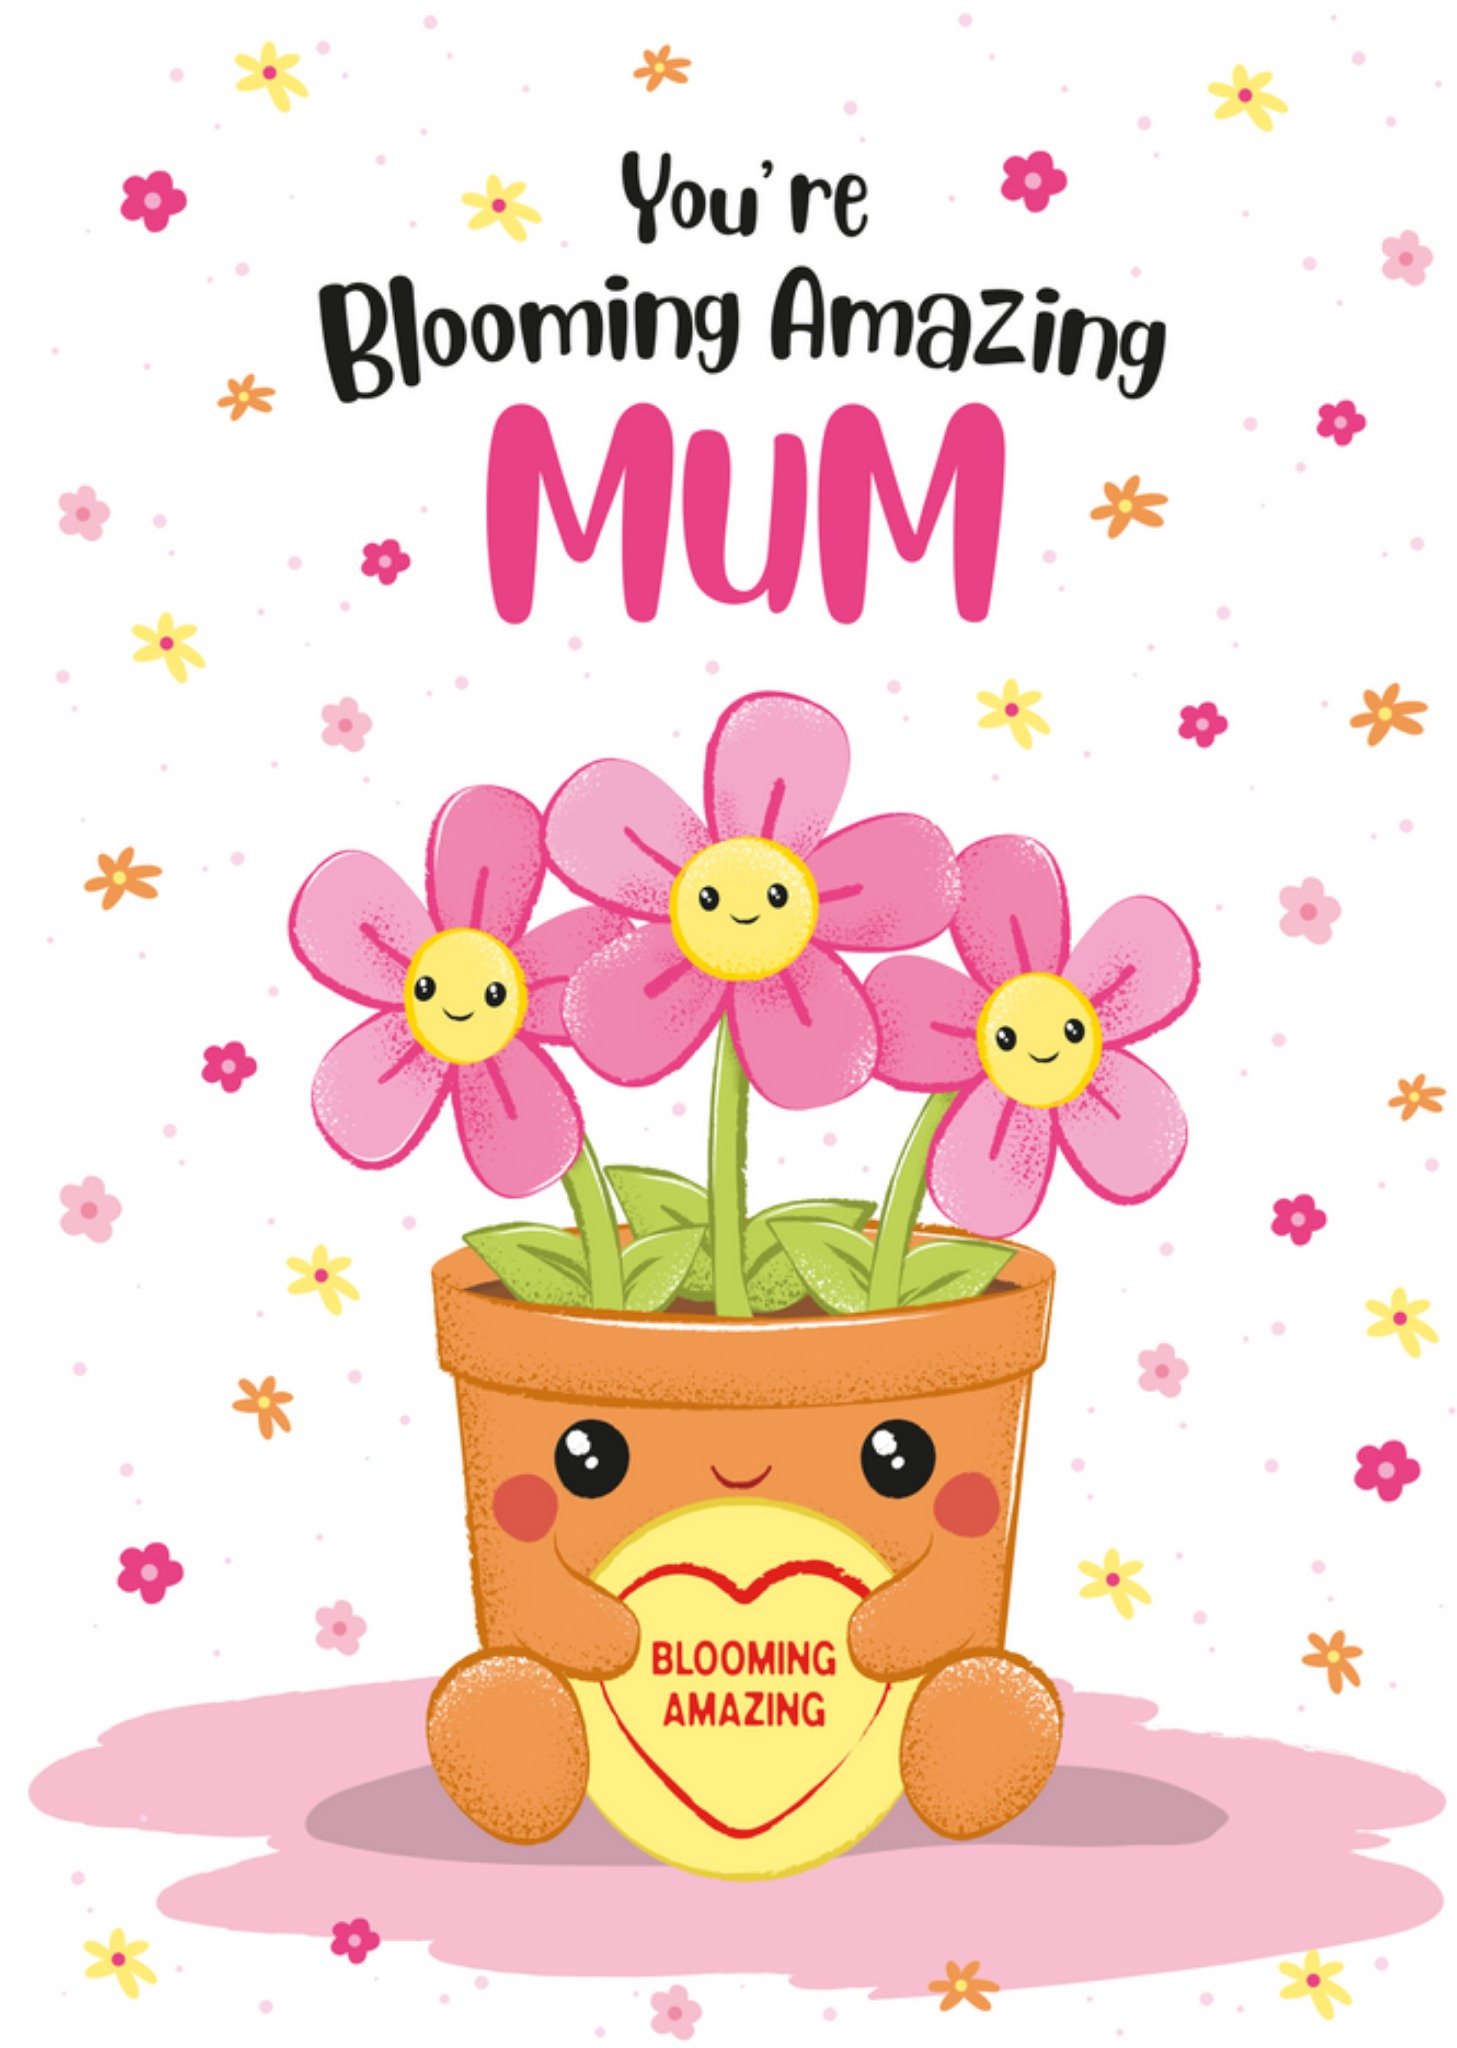 Swizzles Love Hearts Posh Paws You're Blooming Amazing Mum Illustrated Cute Plant Pot Character Moth